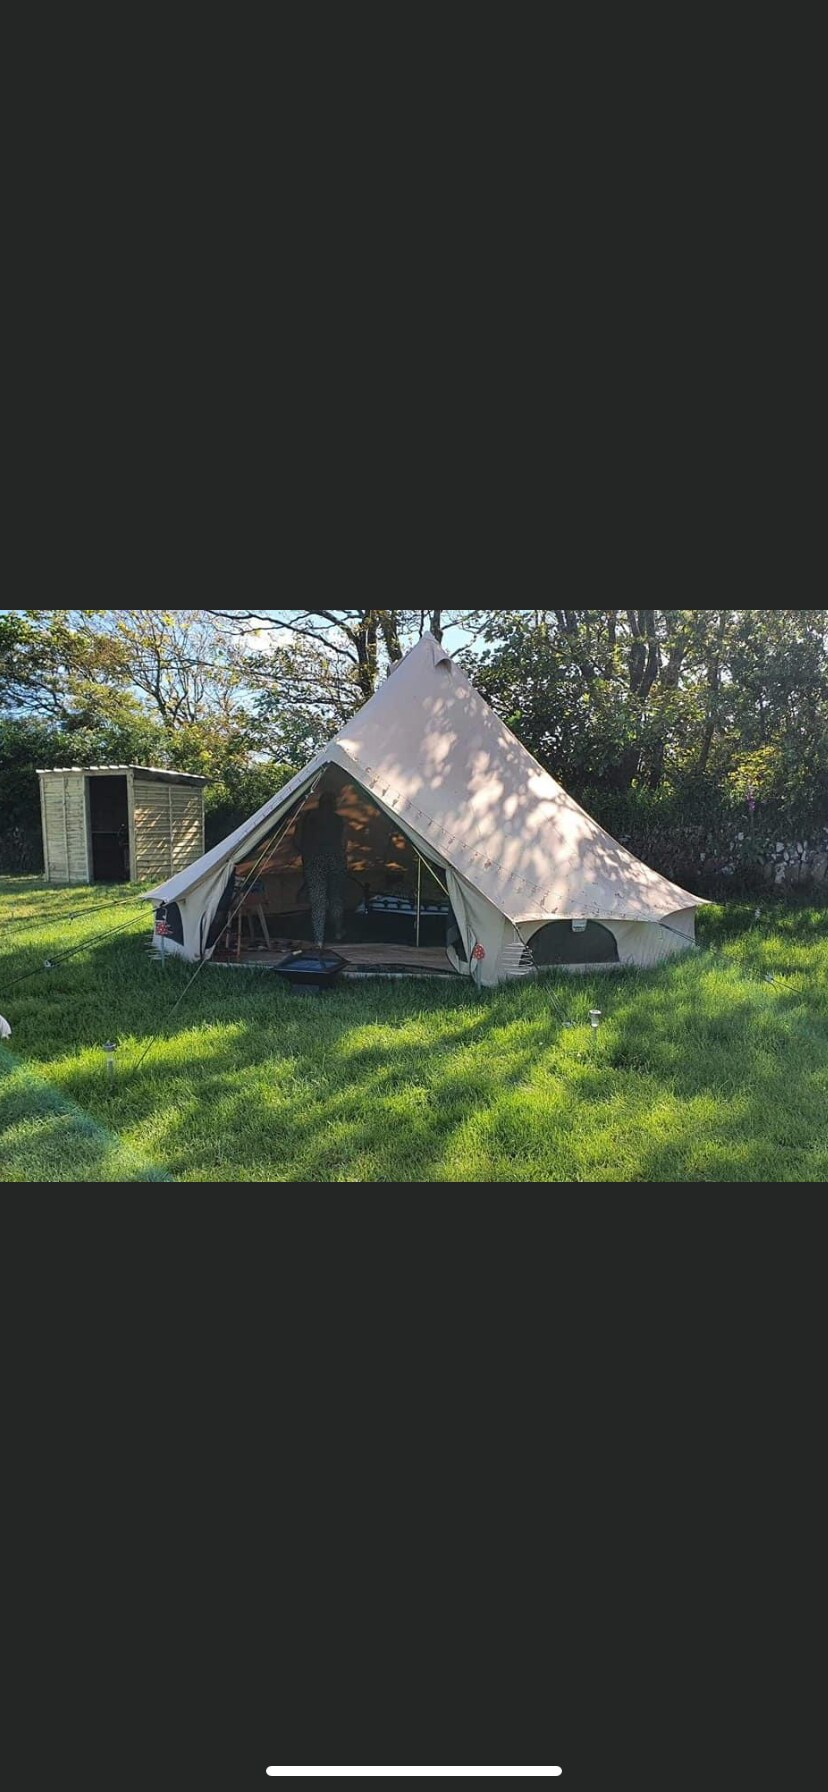 The Owl Tent